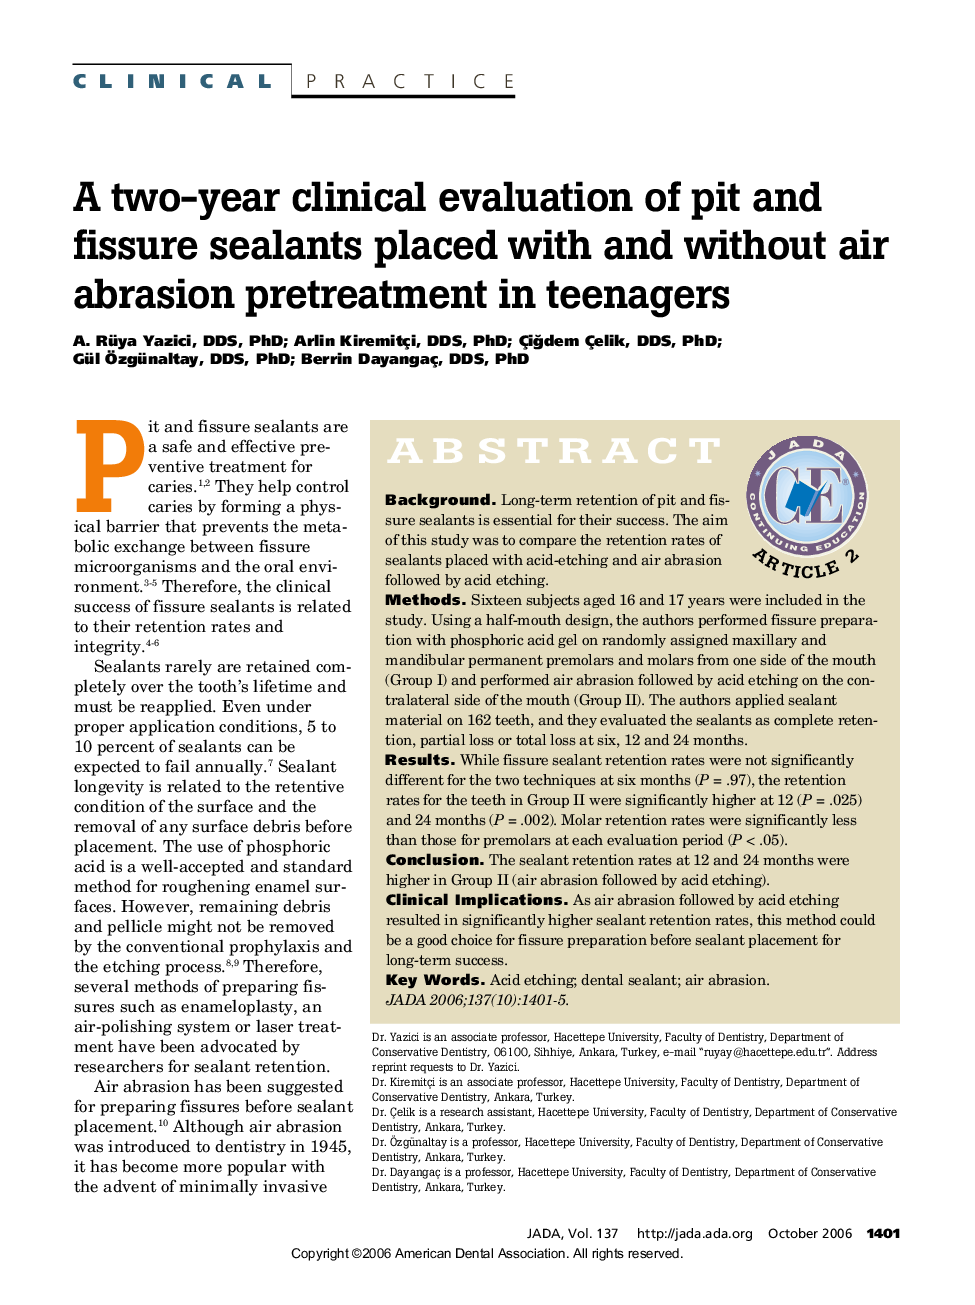 A two-year clinical evaluation of pit and fissure sealants placed with and without air abrasion pretreatment in teenagers 